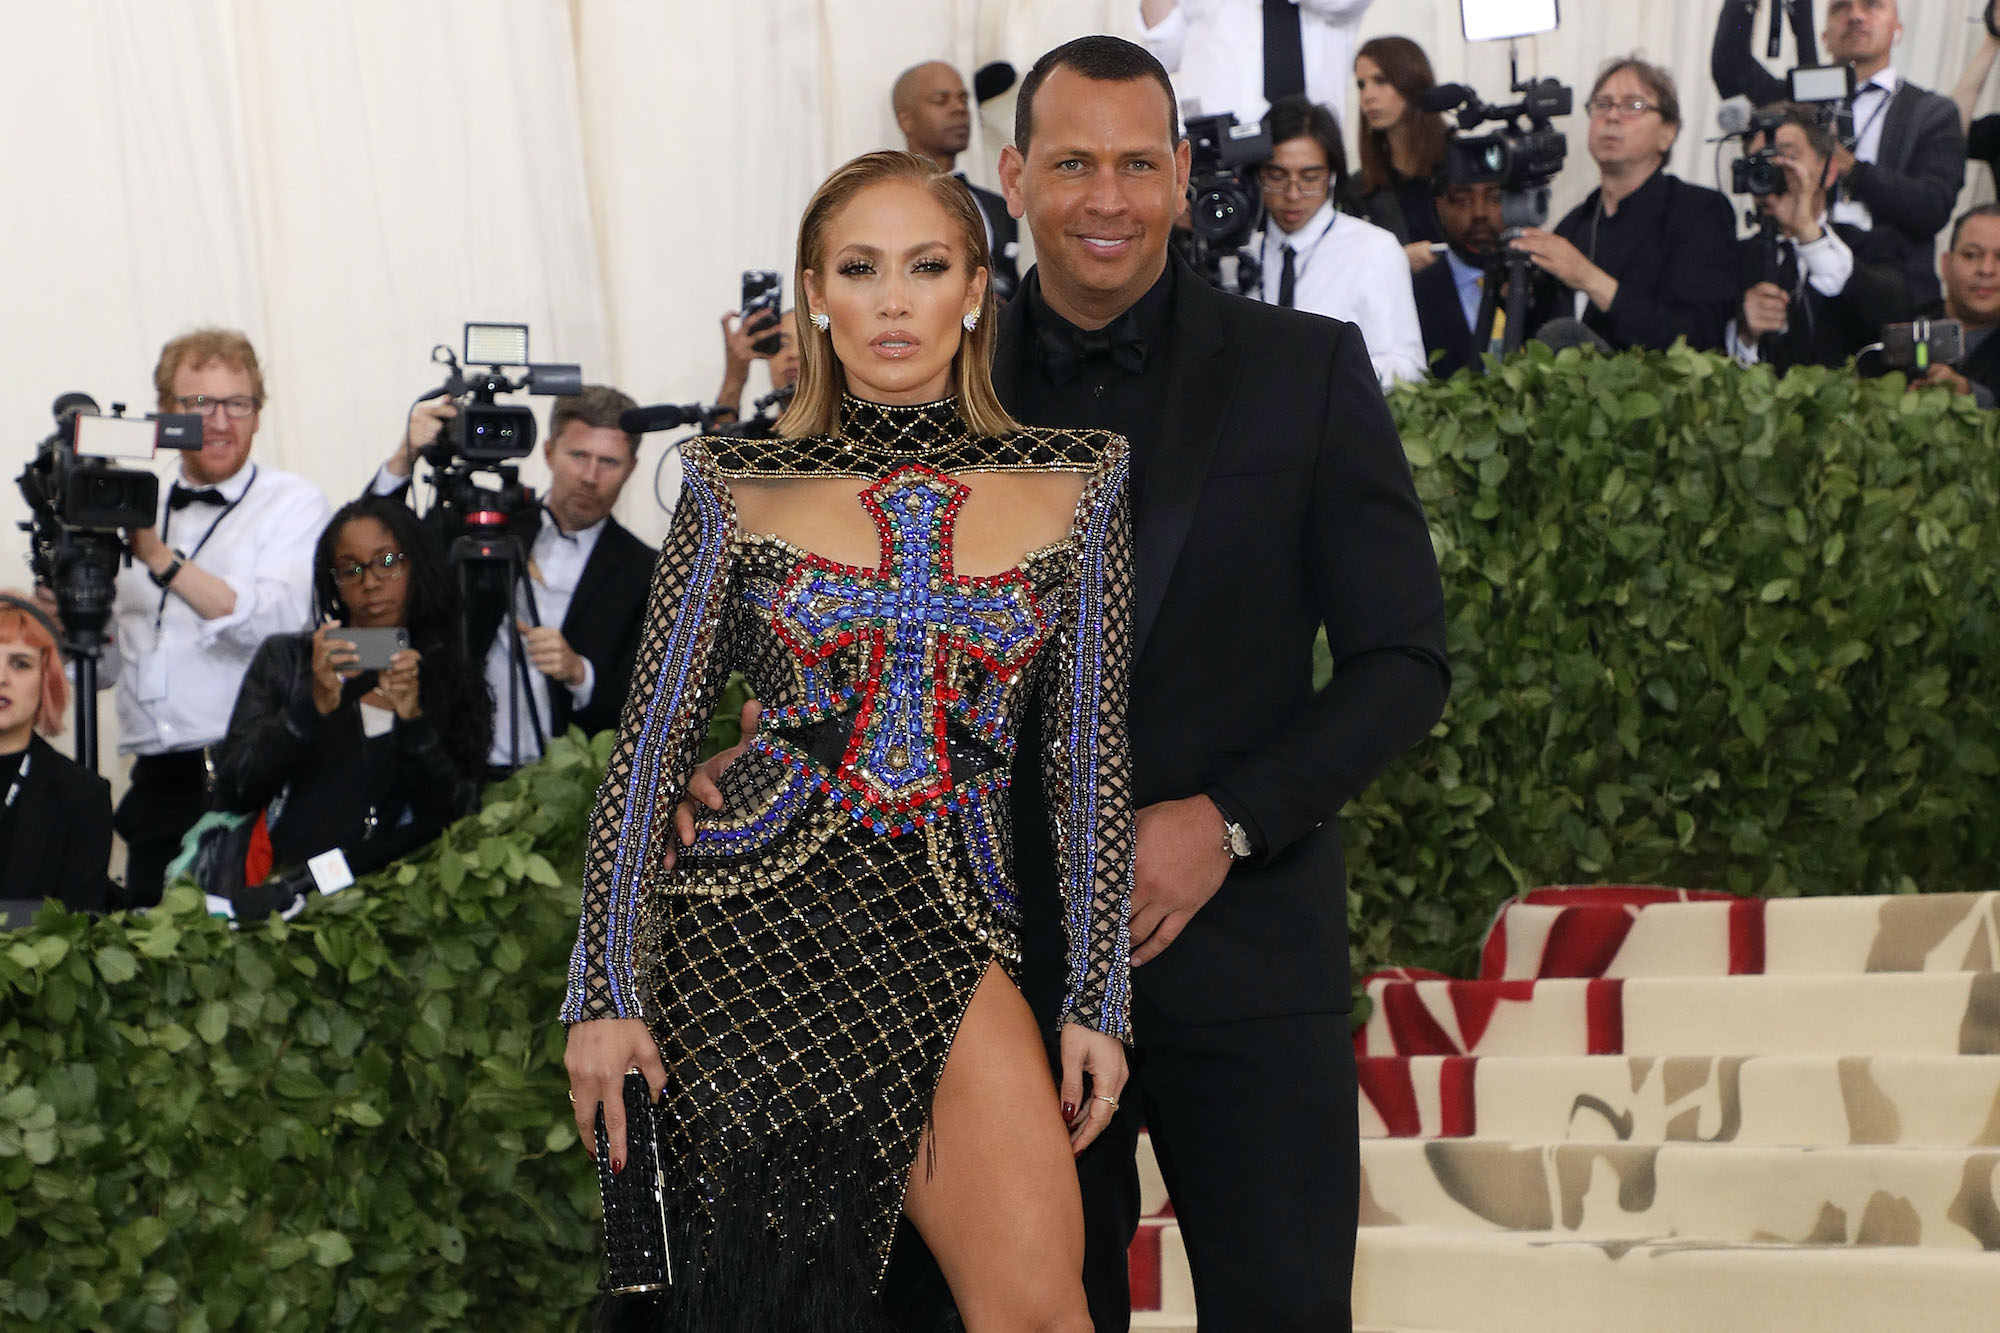 Jennifer Lopez and Alex Rodriguez in front of a crowd of photographers